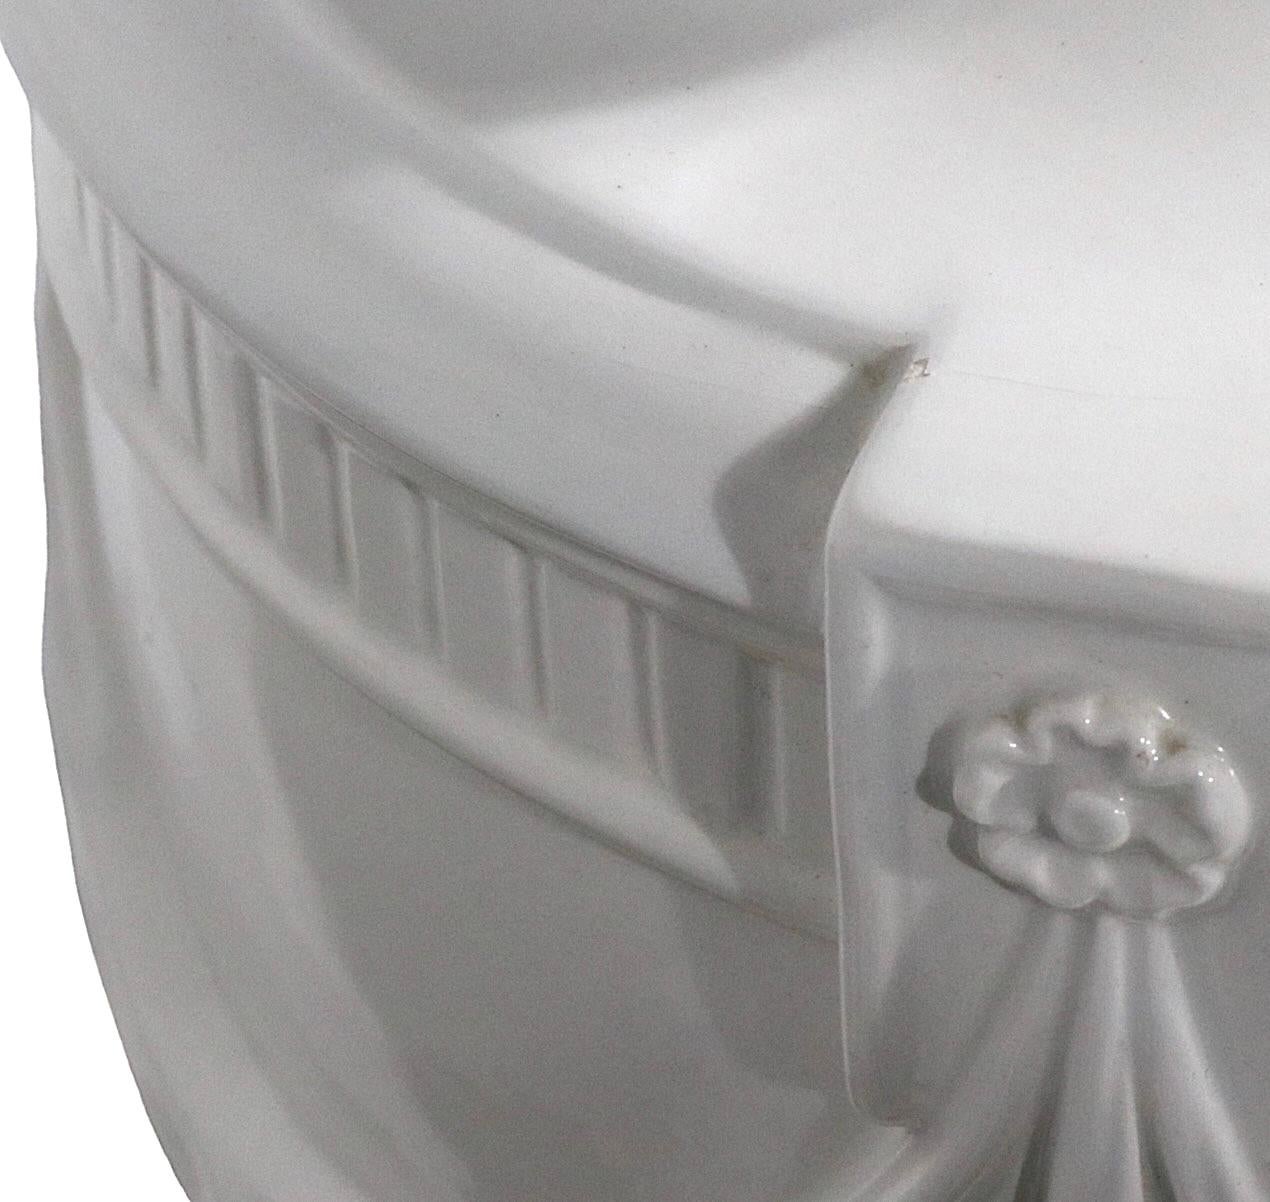 White on White Ceramic Urn Form Table Lamp Made in Italy, circa, 1950s-1970s For Sale 2